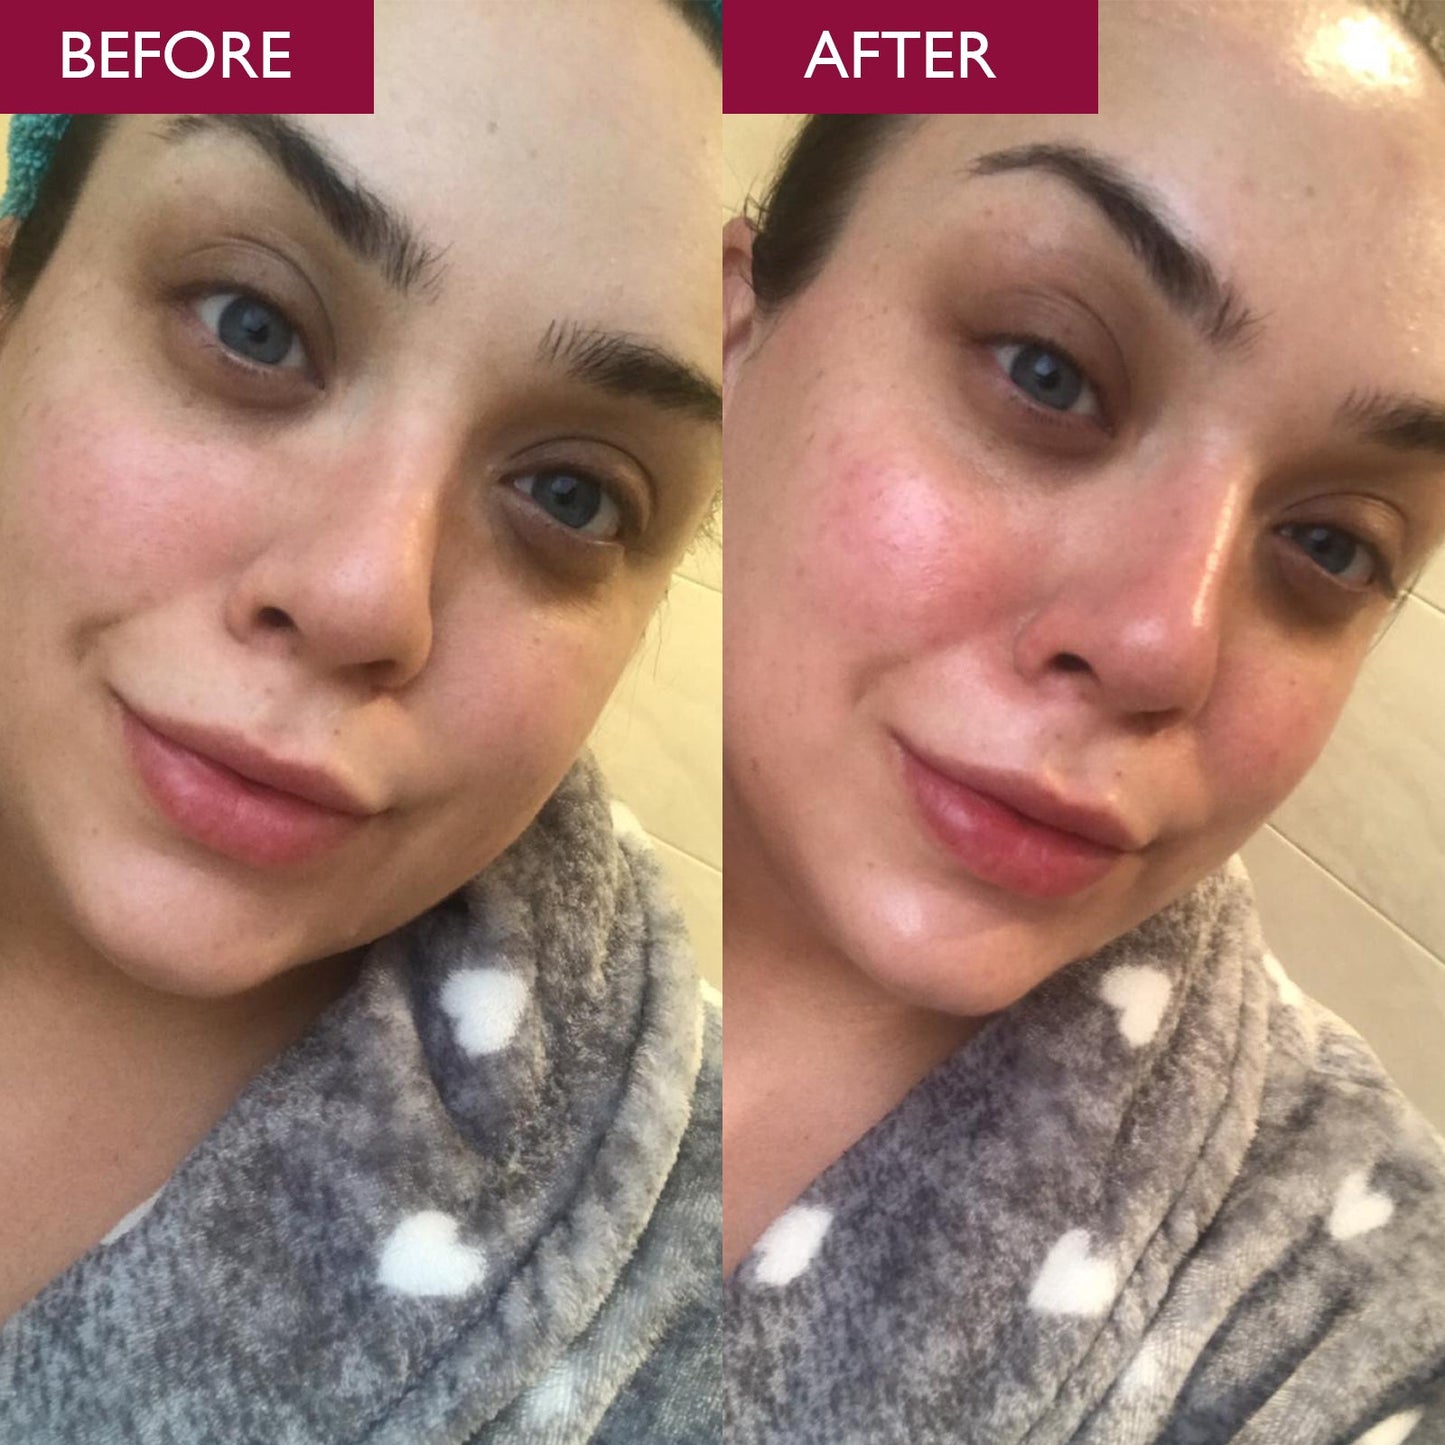 Before and after image of a lady showing brighter, less dull skin after using pro-radiance enzymatic cleanser